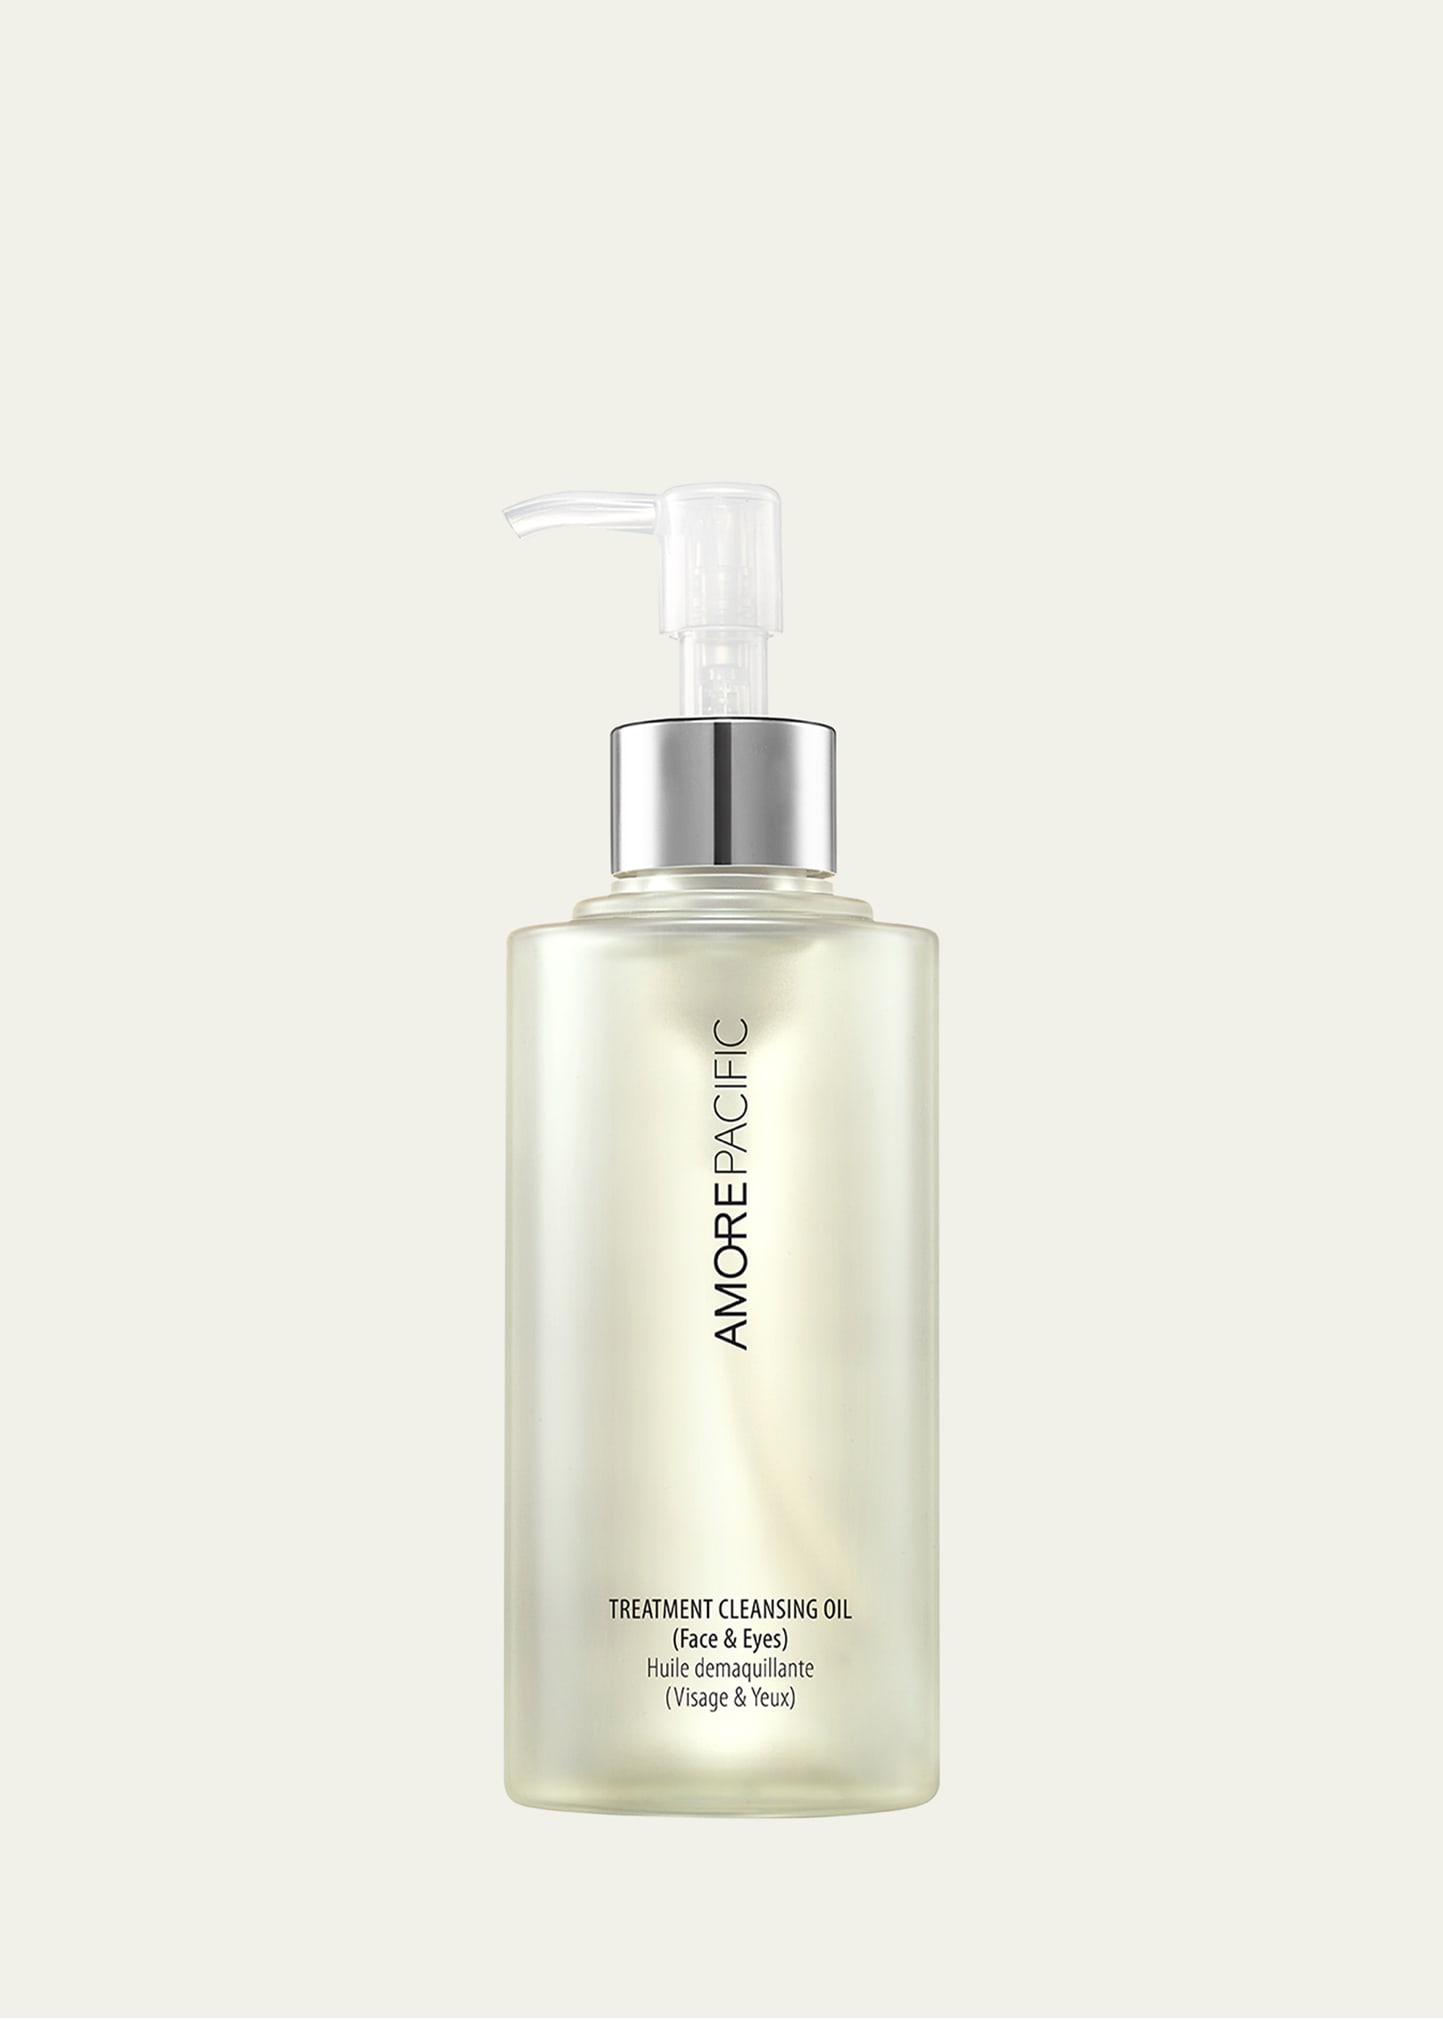 AMOREPACIFIC Treatment Cleansing Oil, 6.8 oz.